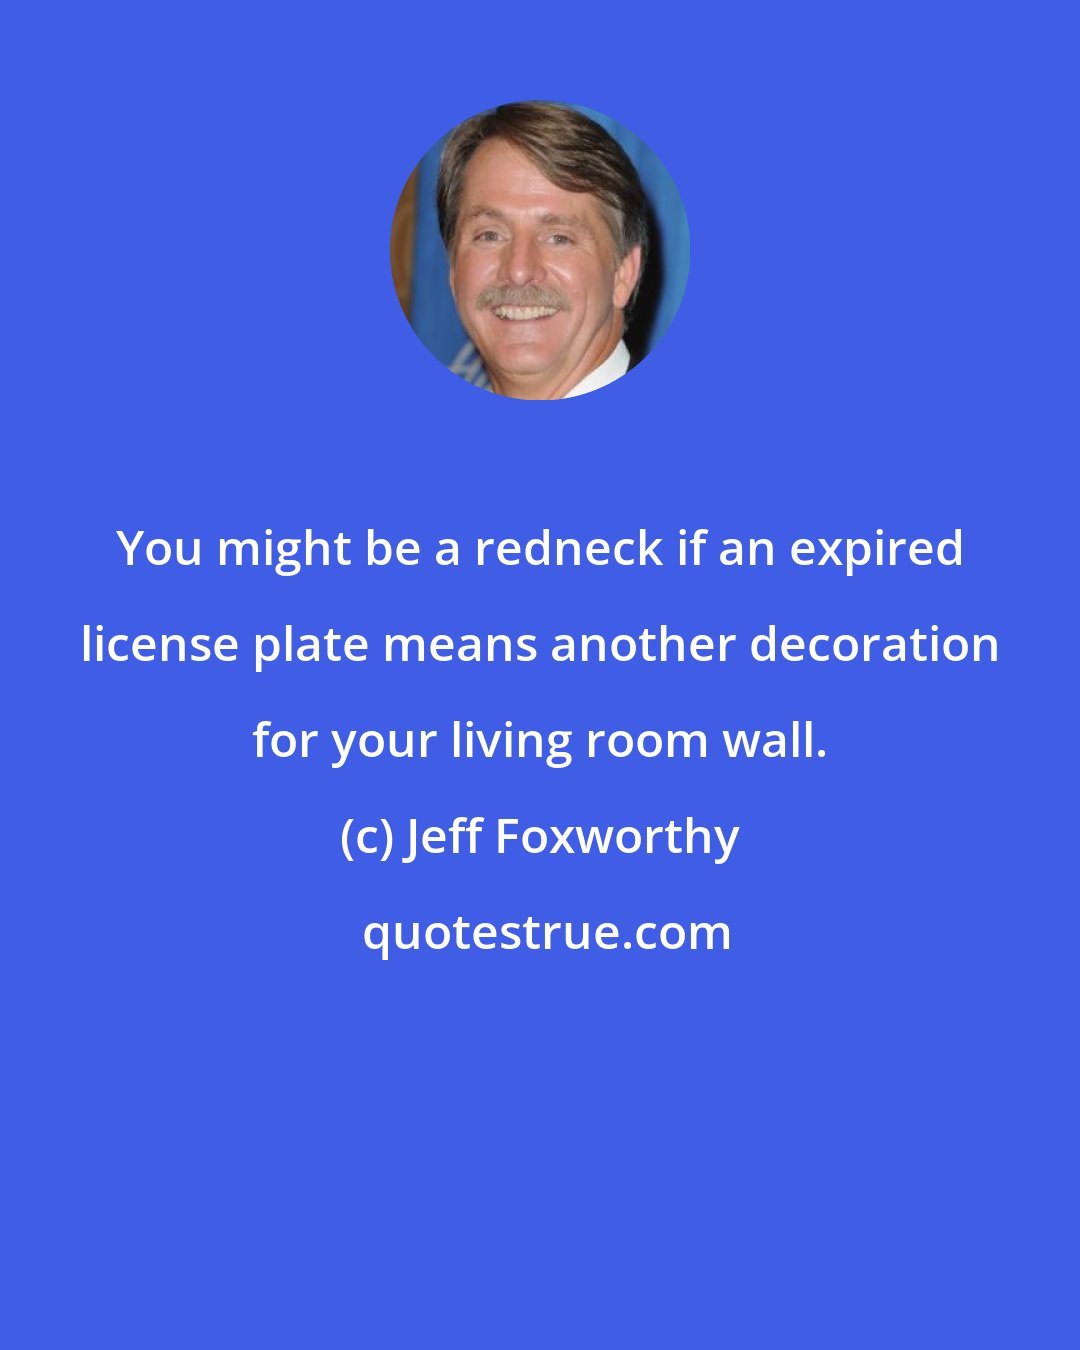 Jeff Foxworthy: You might be a redneck if an expired license plate means another decoration for your living room wall.